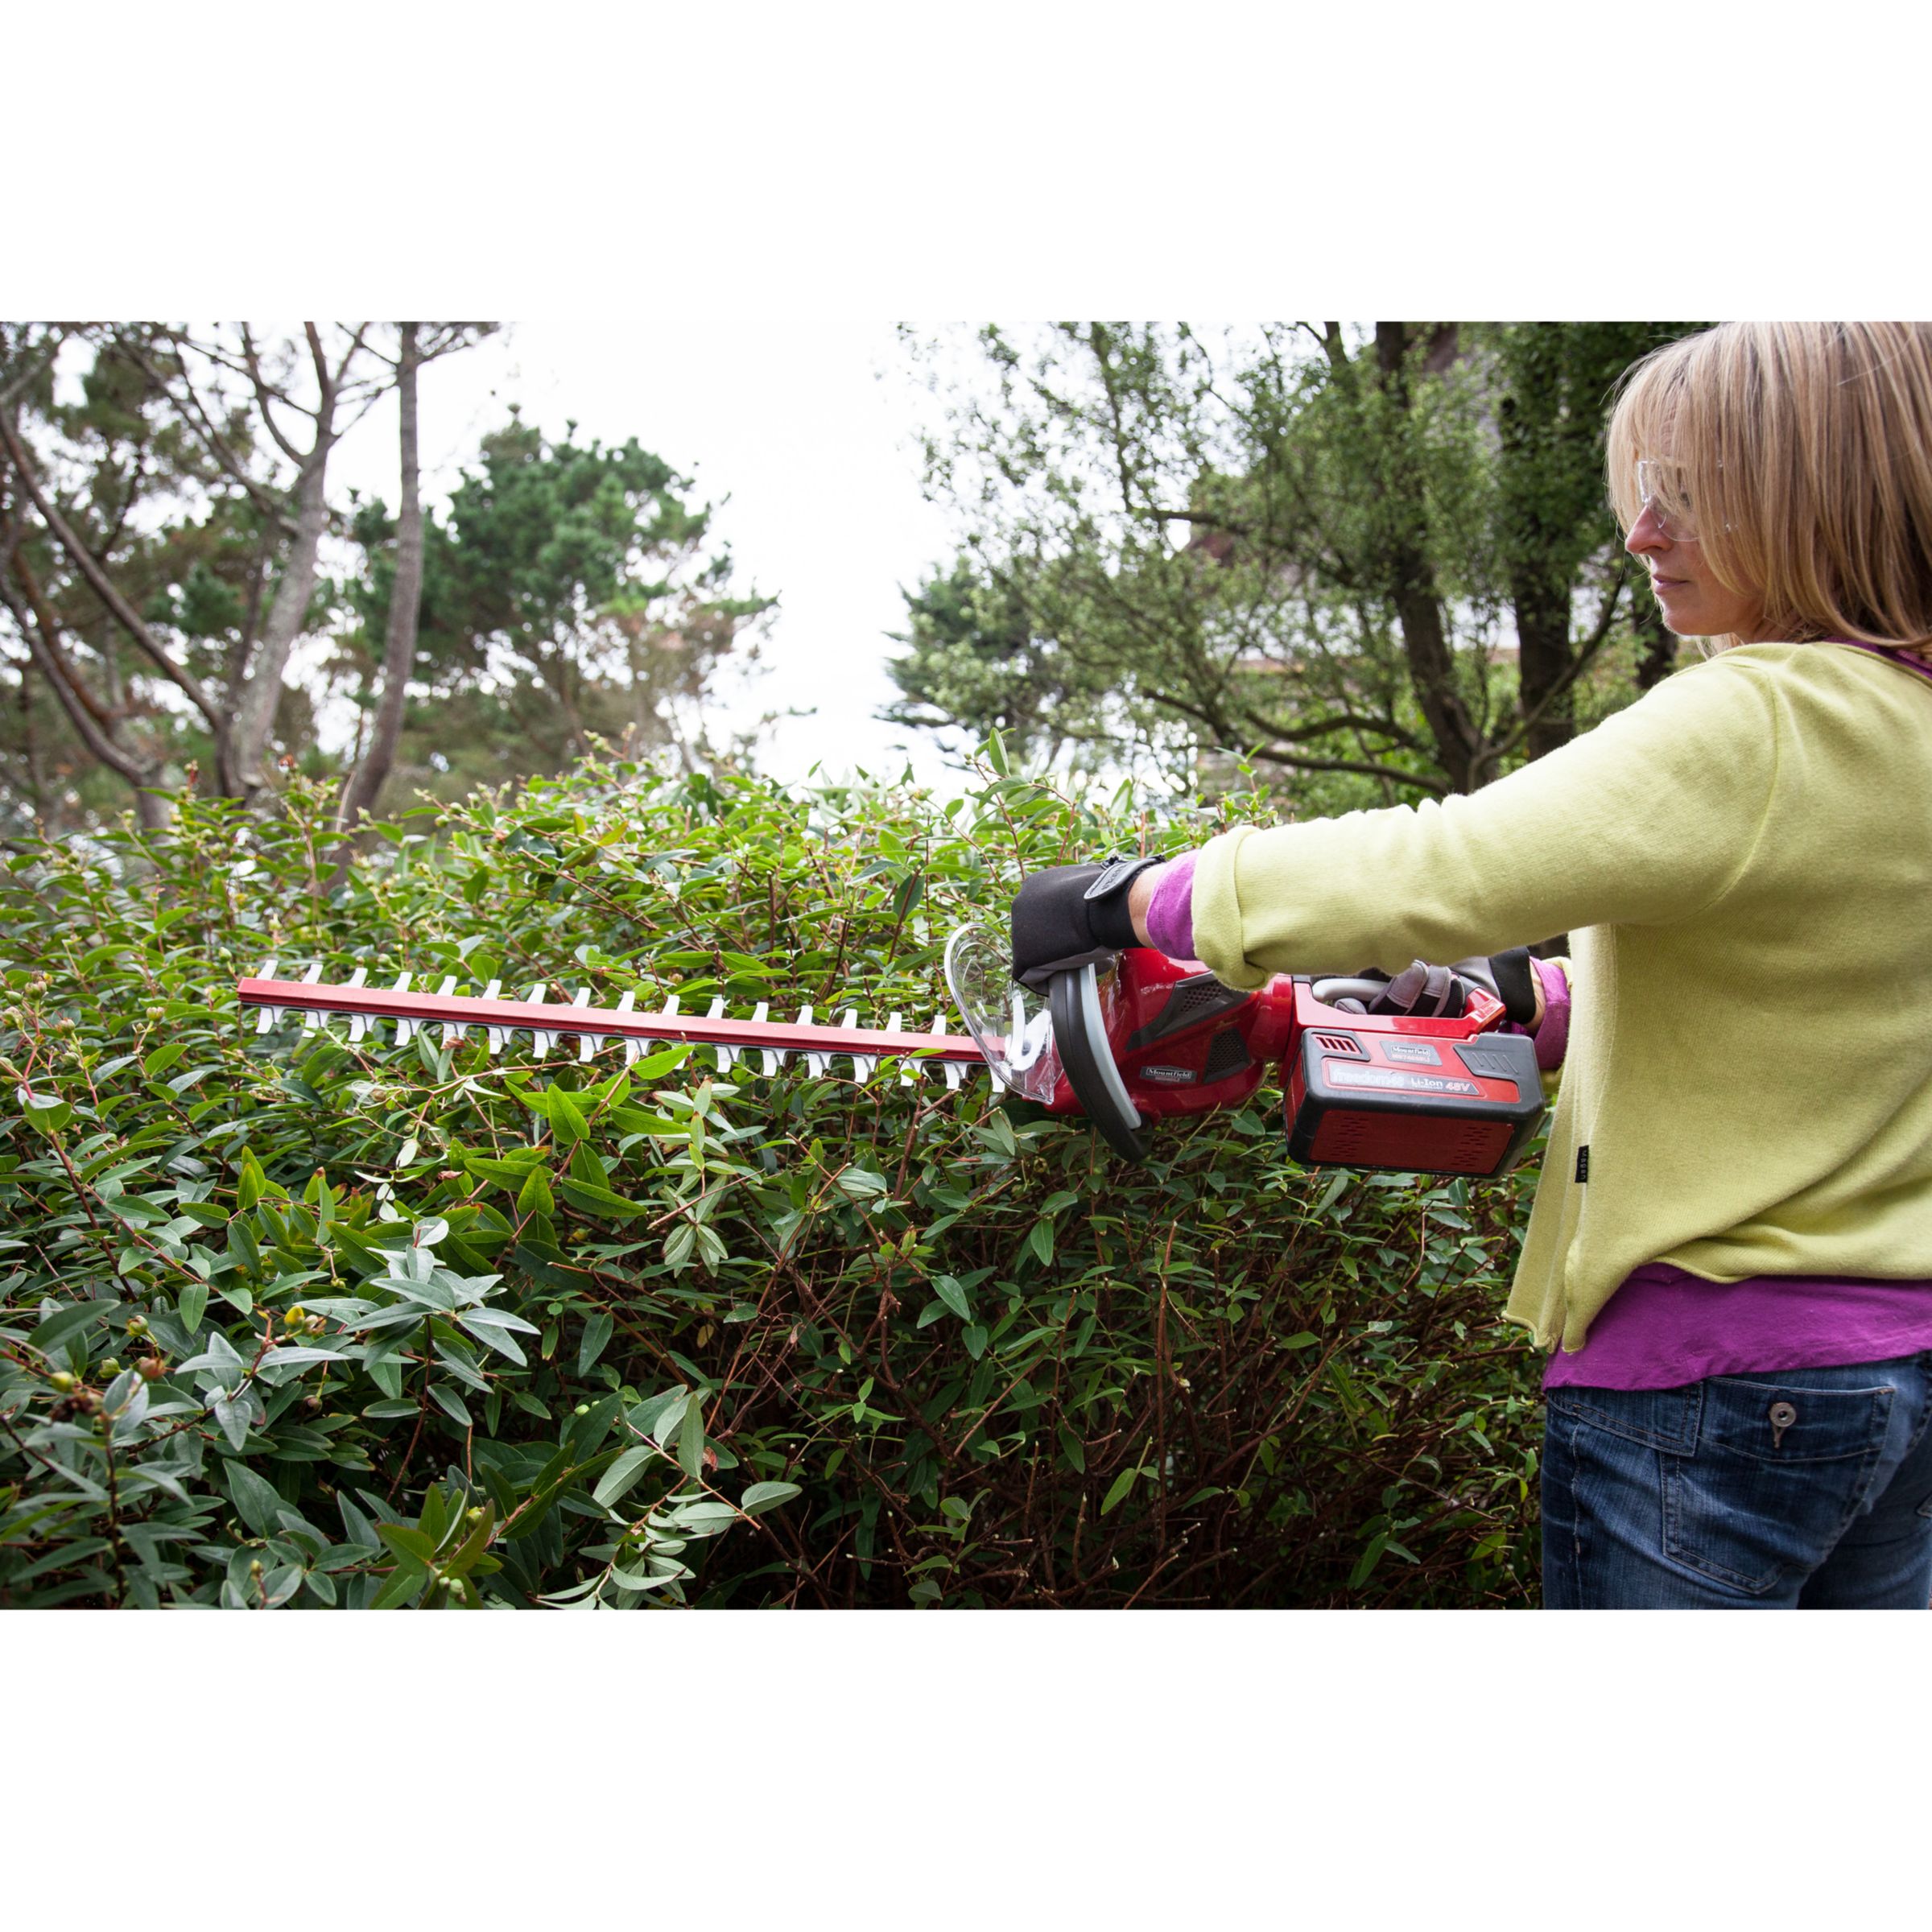 mountfield cordless hedge trimmer